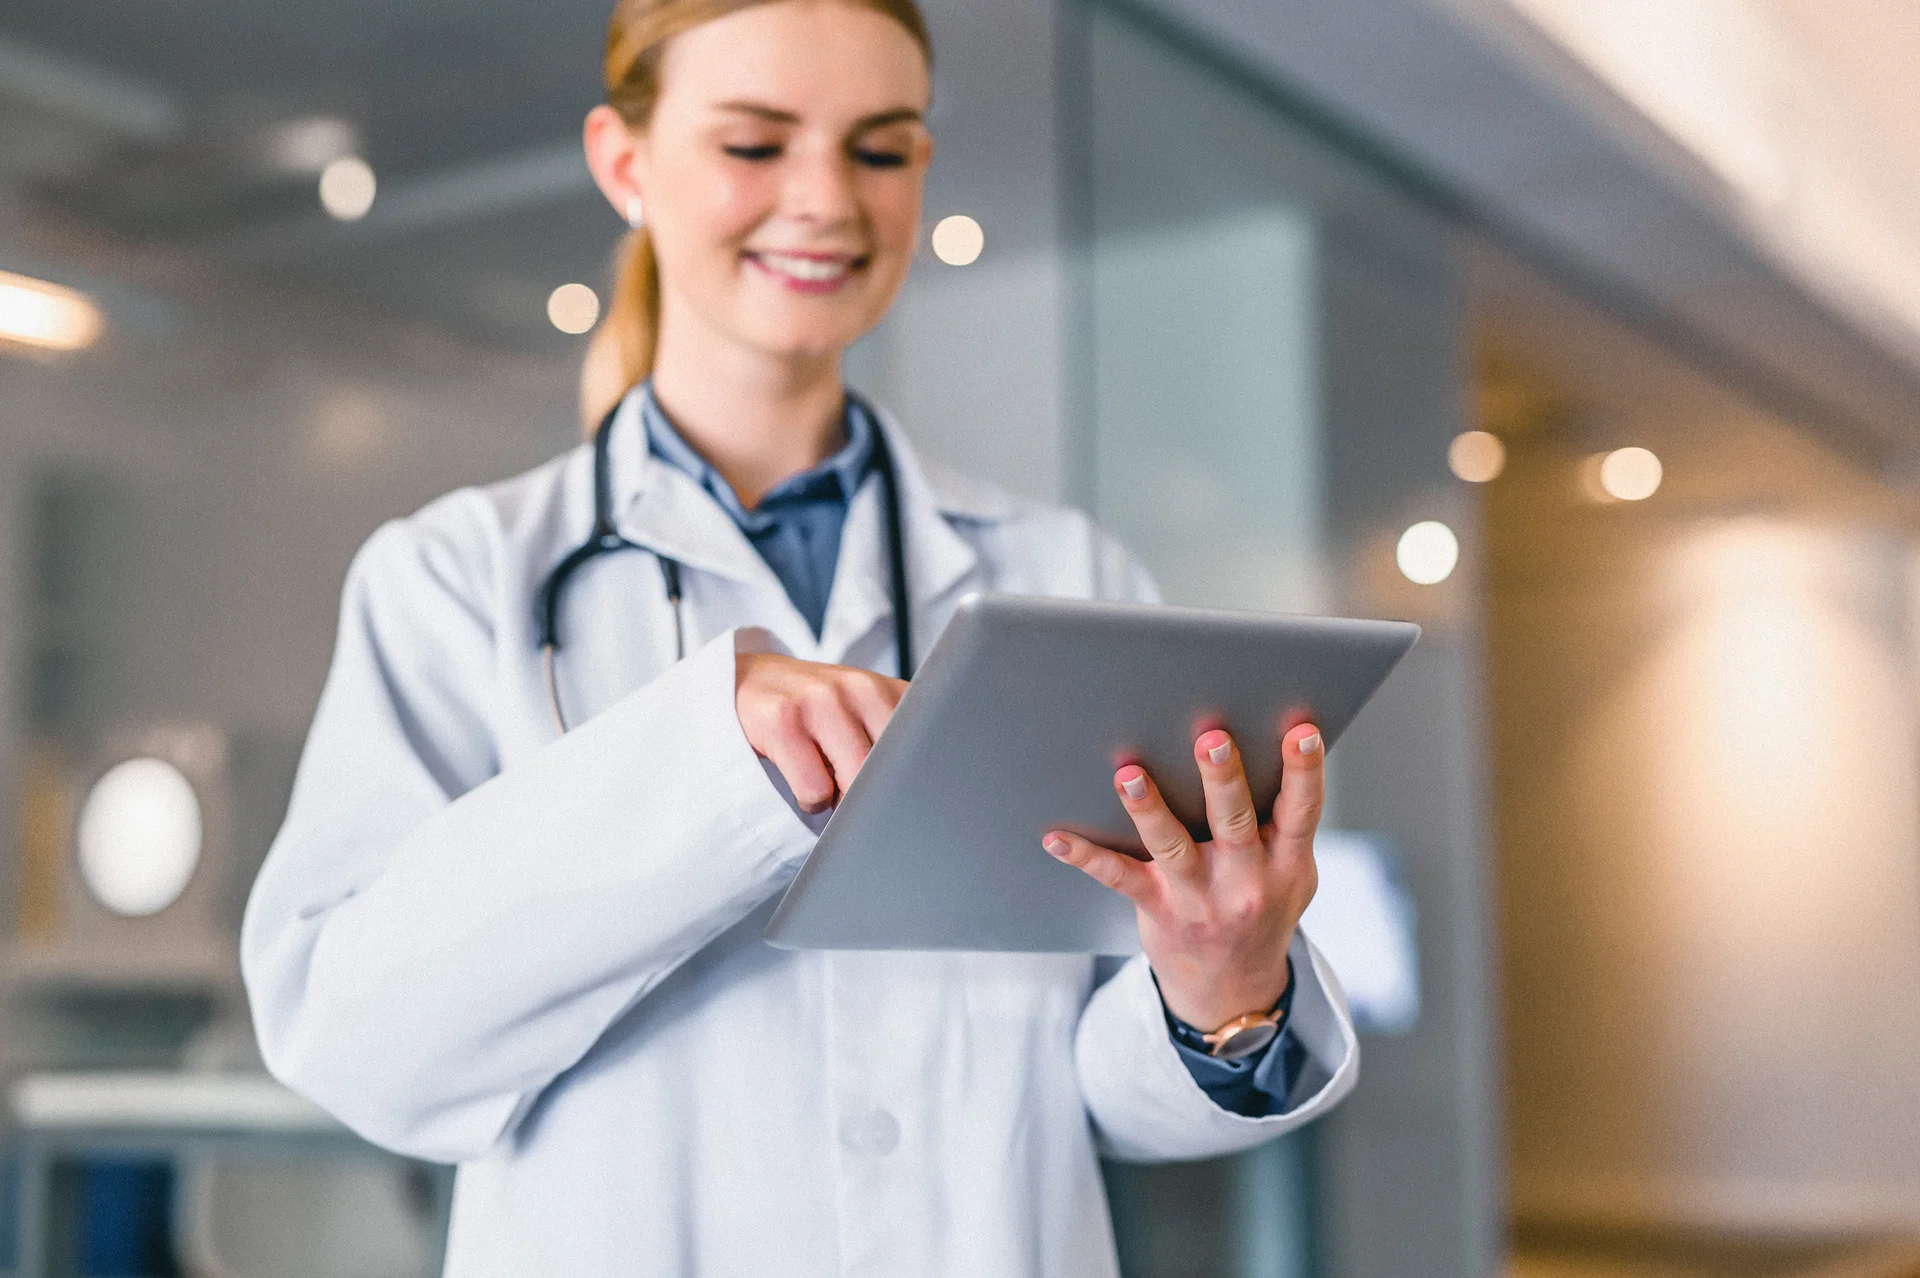 How to Extract Data From Electronic Health Records (EHR) - Calysta EMR